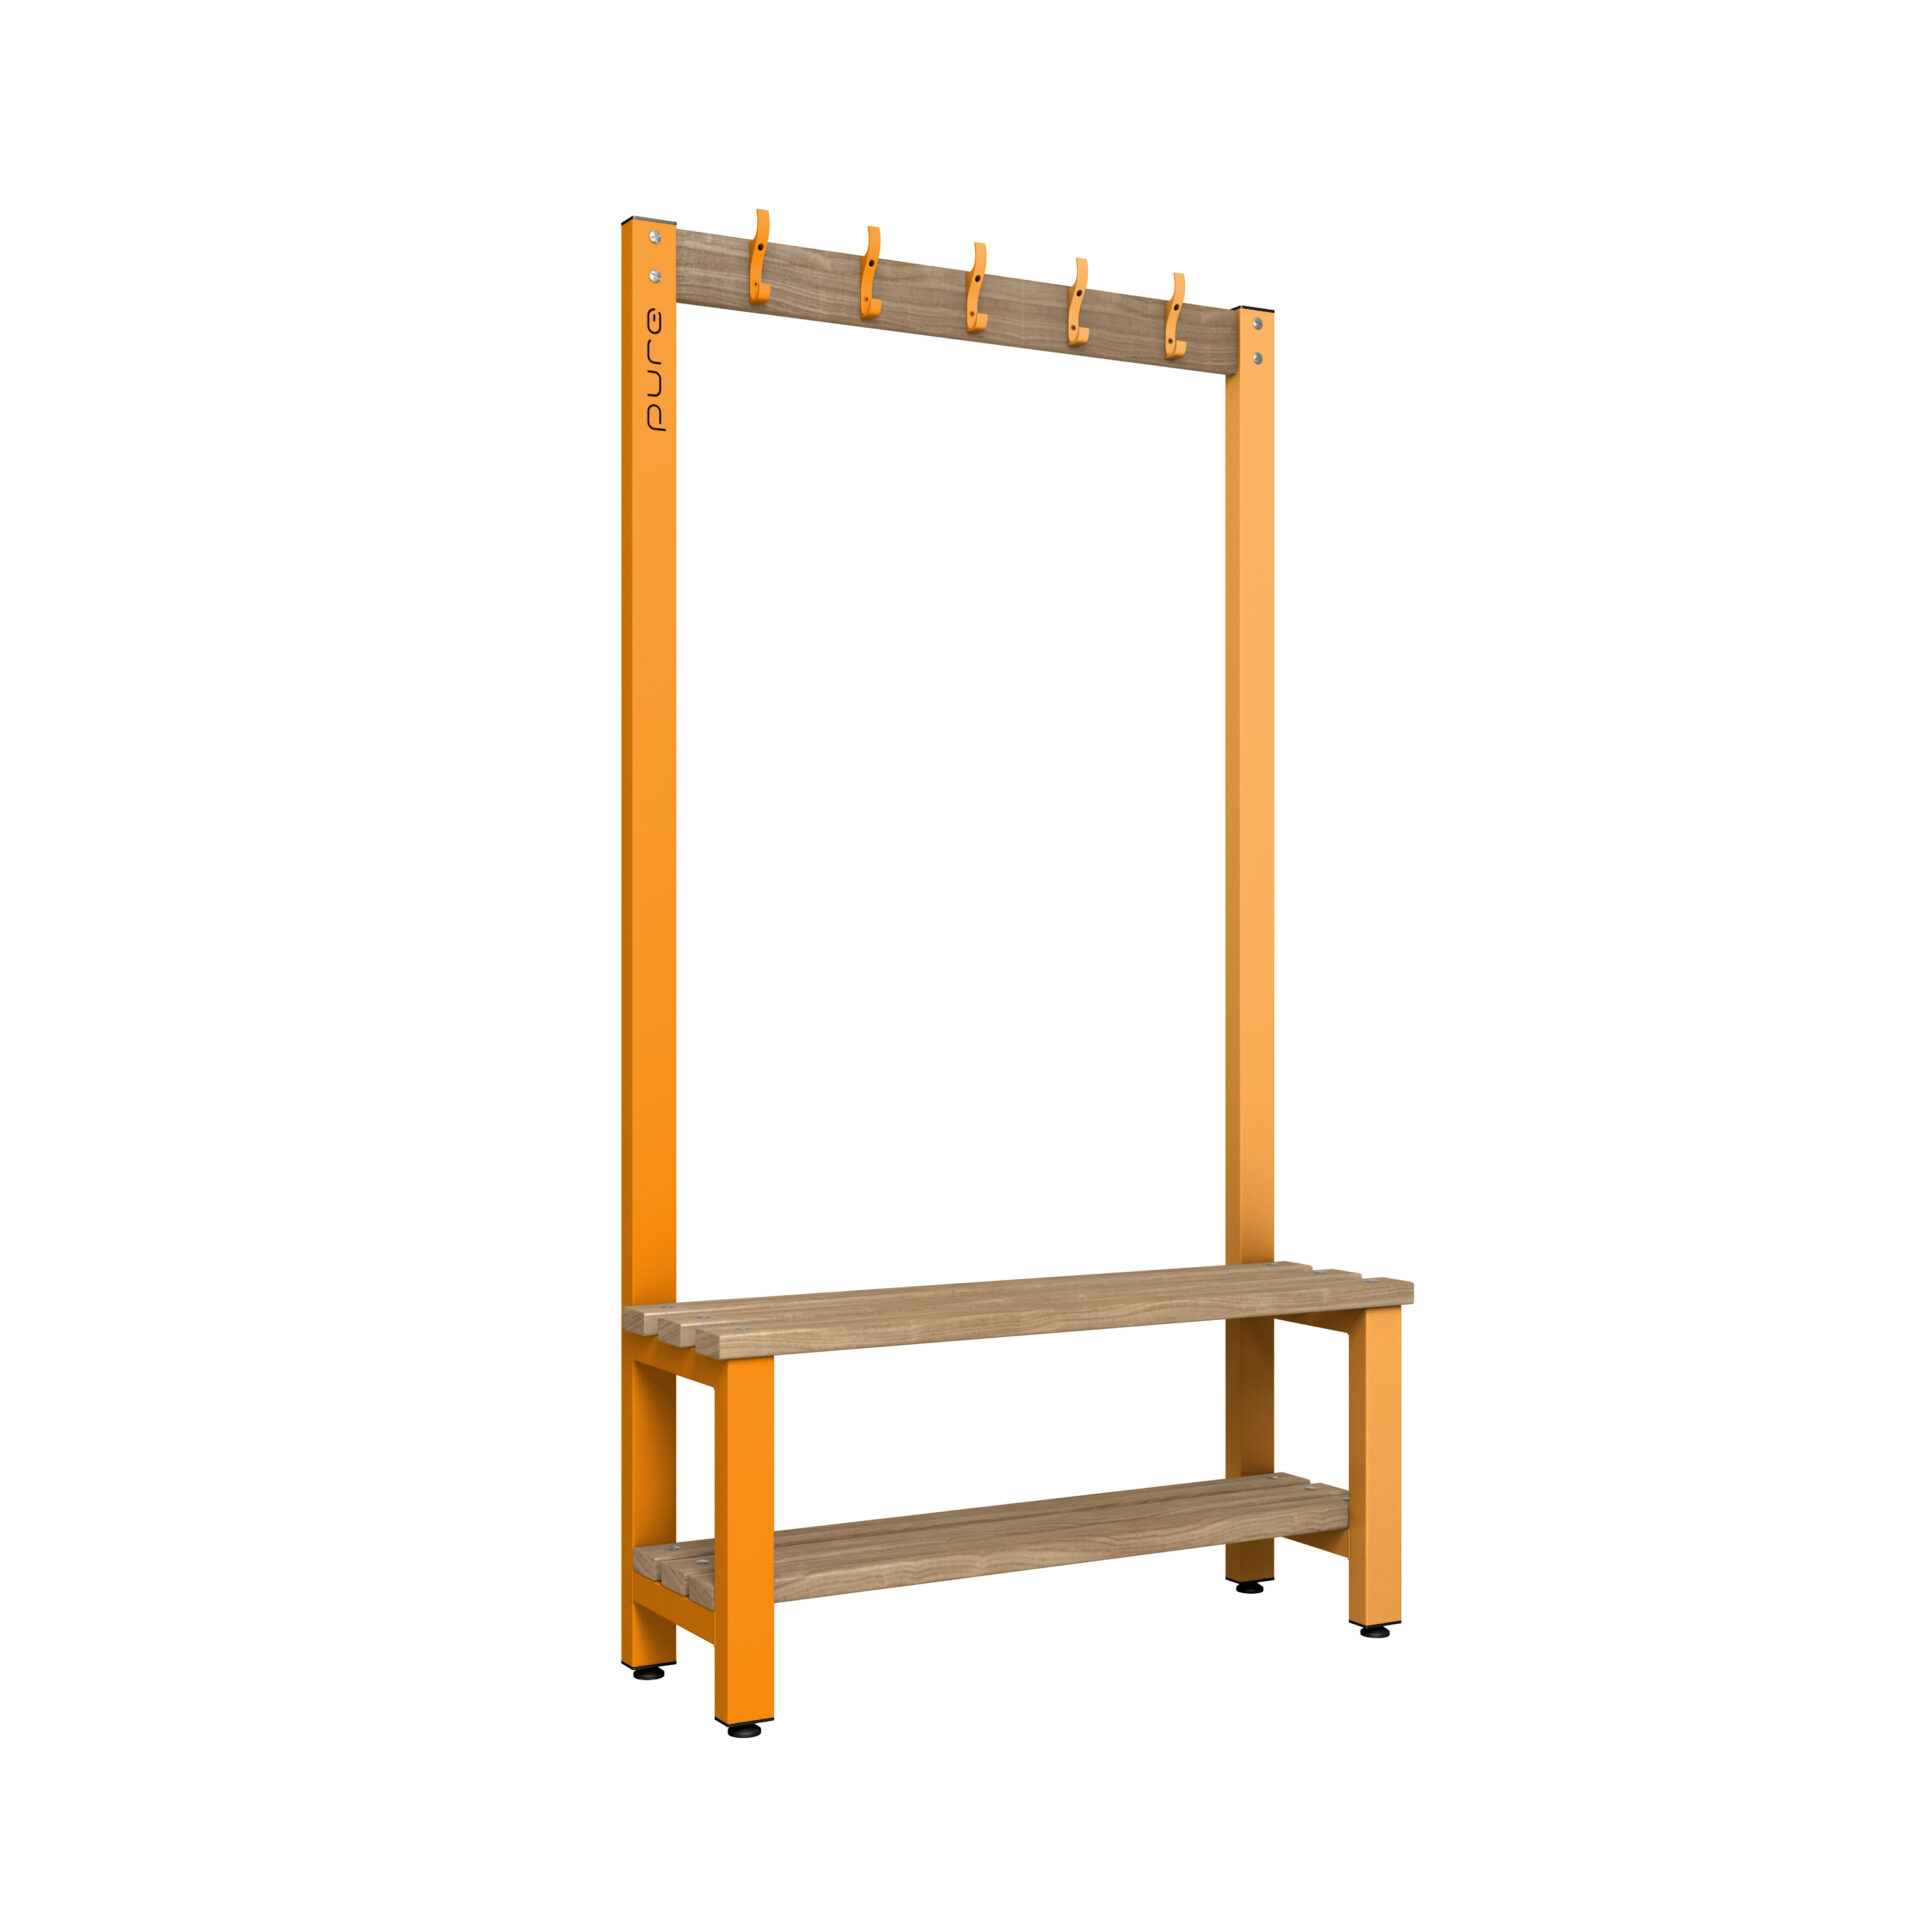 Pure Carbon Zero Single Sided 1000mm 5 Hook Bench With Shoe Shelf - Magma Orange / Solid Timber